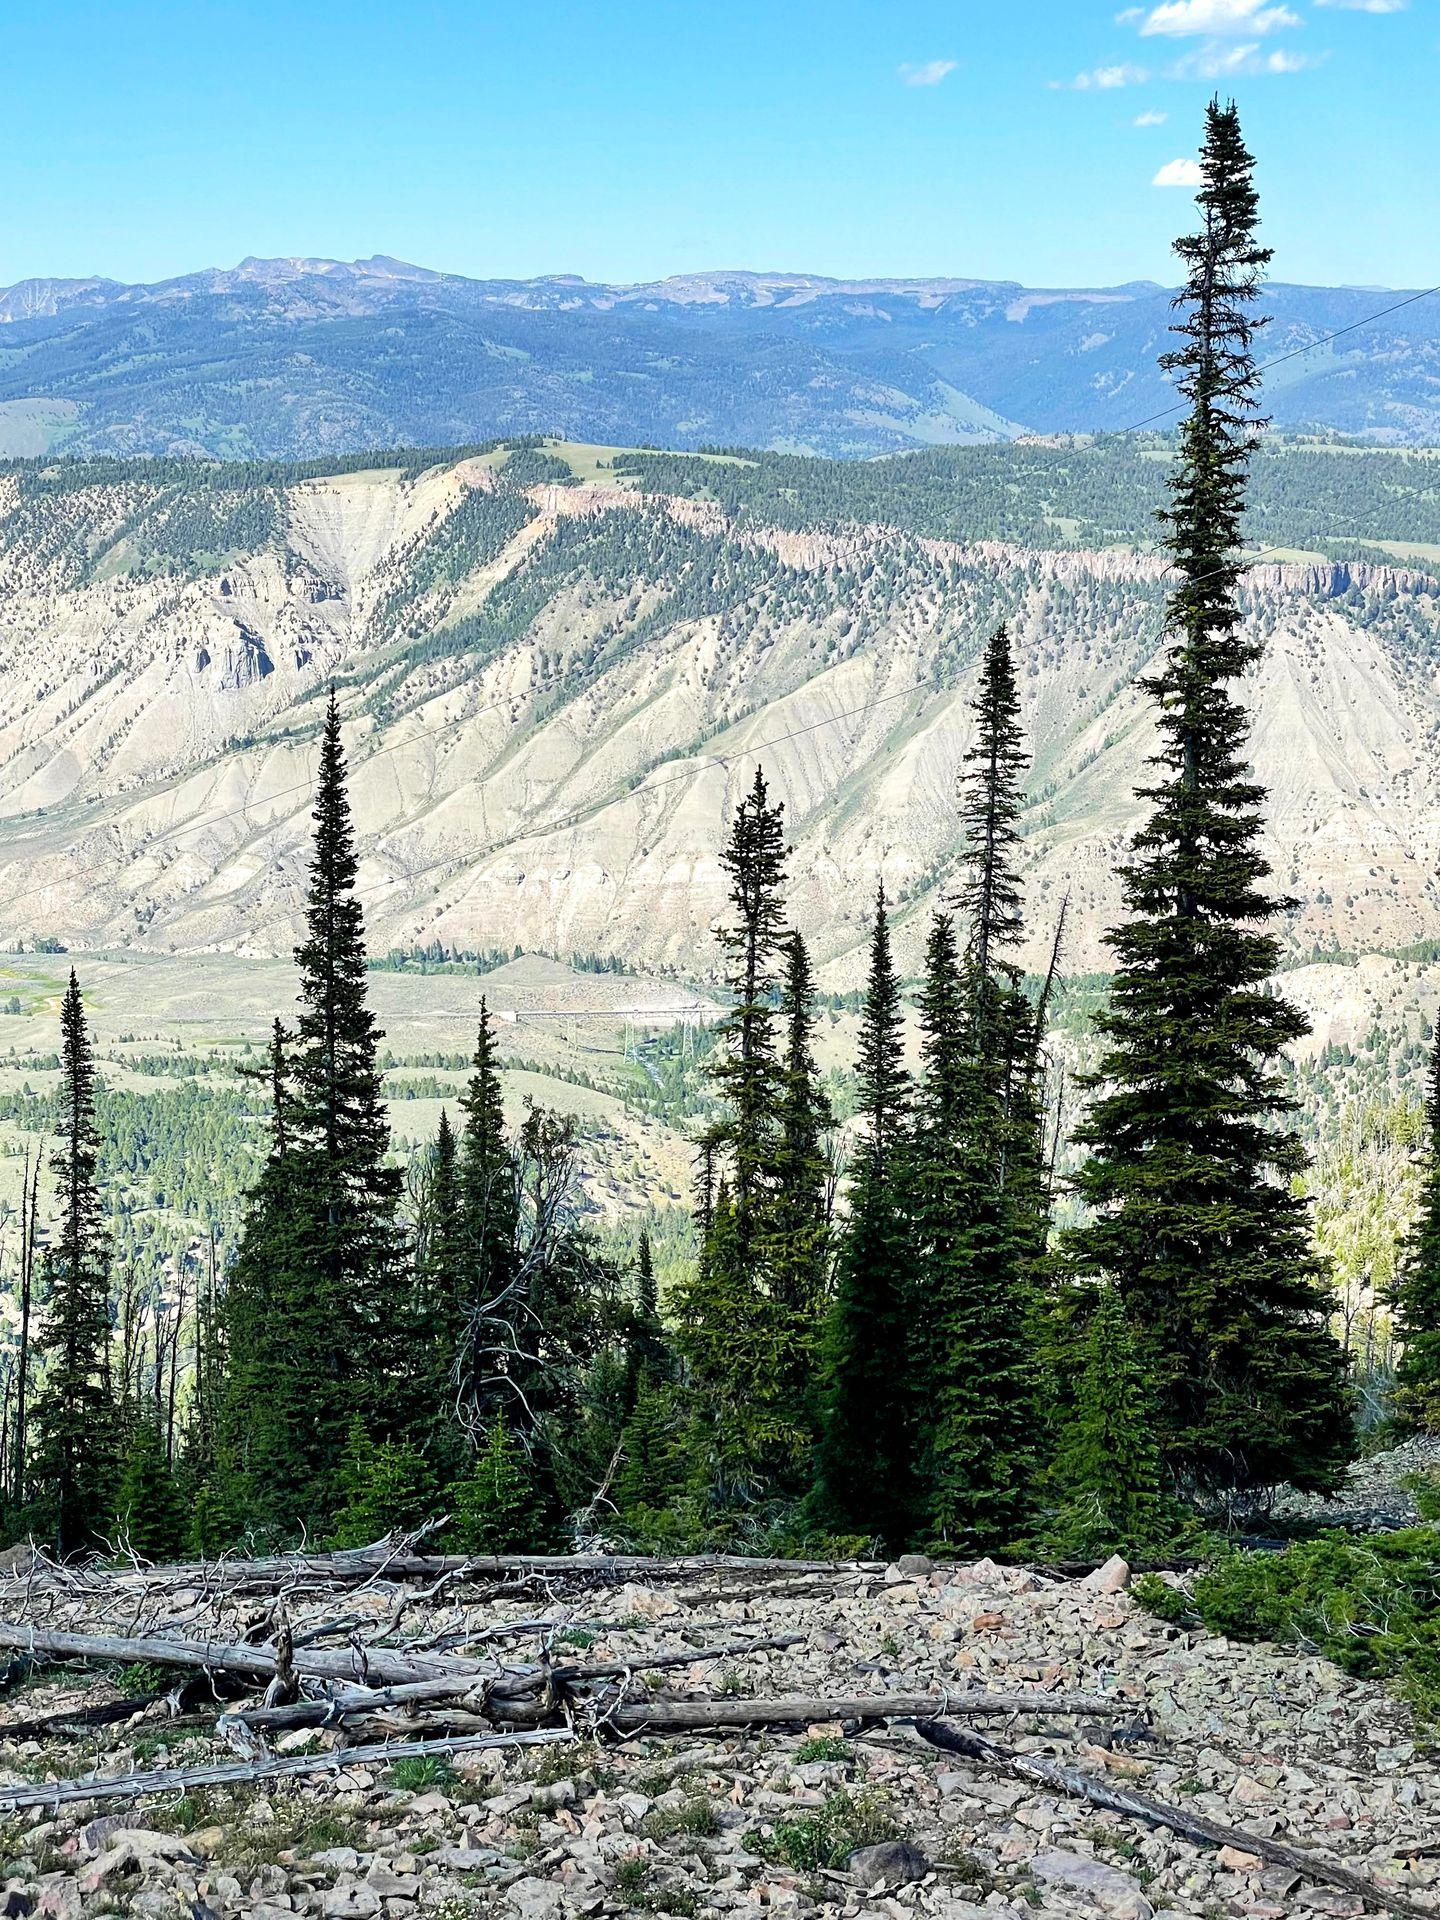 A view of mountains with trees in the foreground from the Bunsen Peak trail.